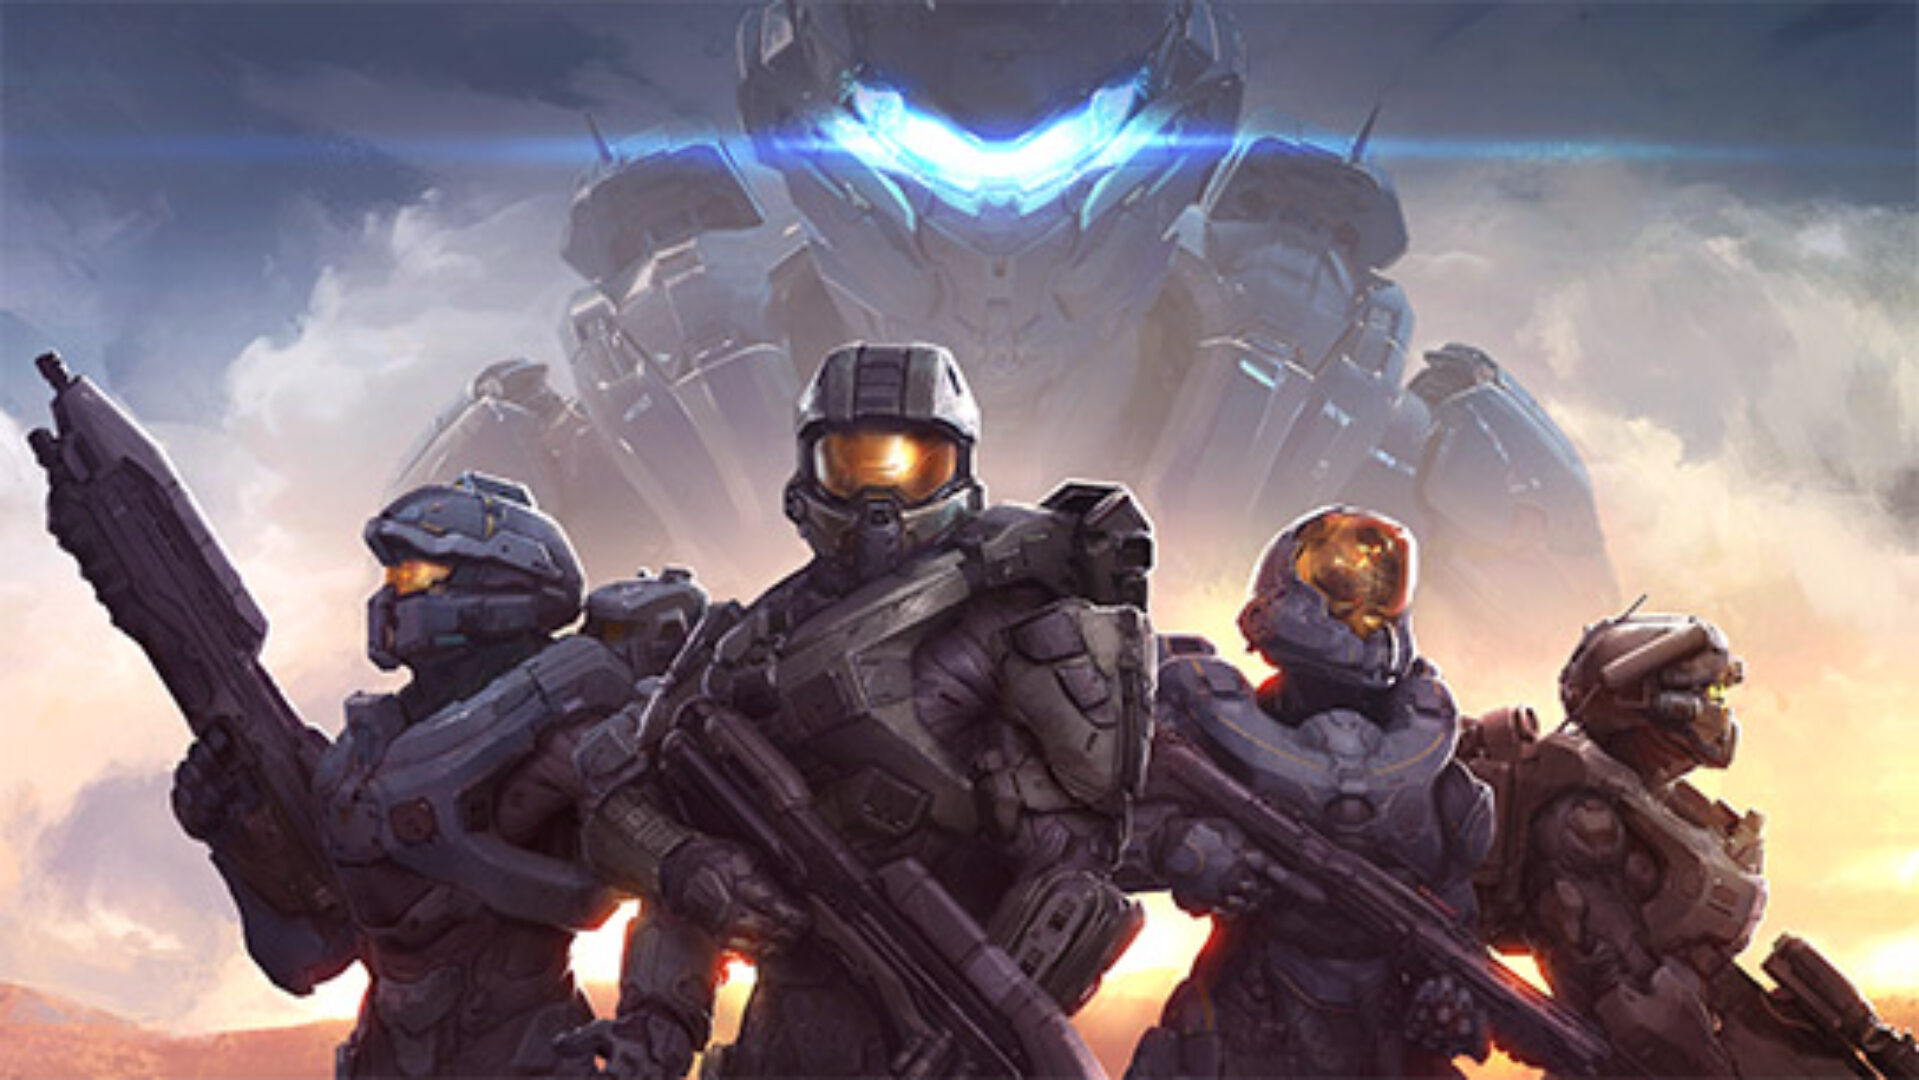 New Halo 5: Guardians Trailer Mourns Master Chief